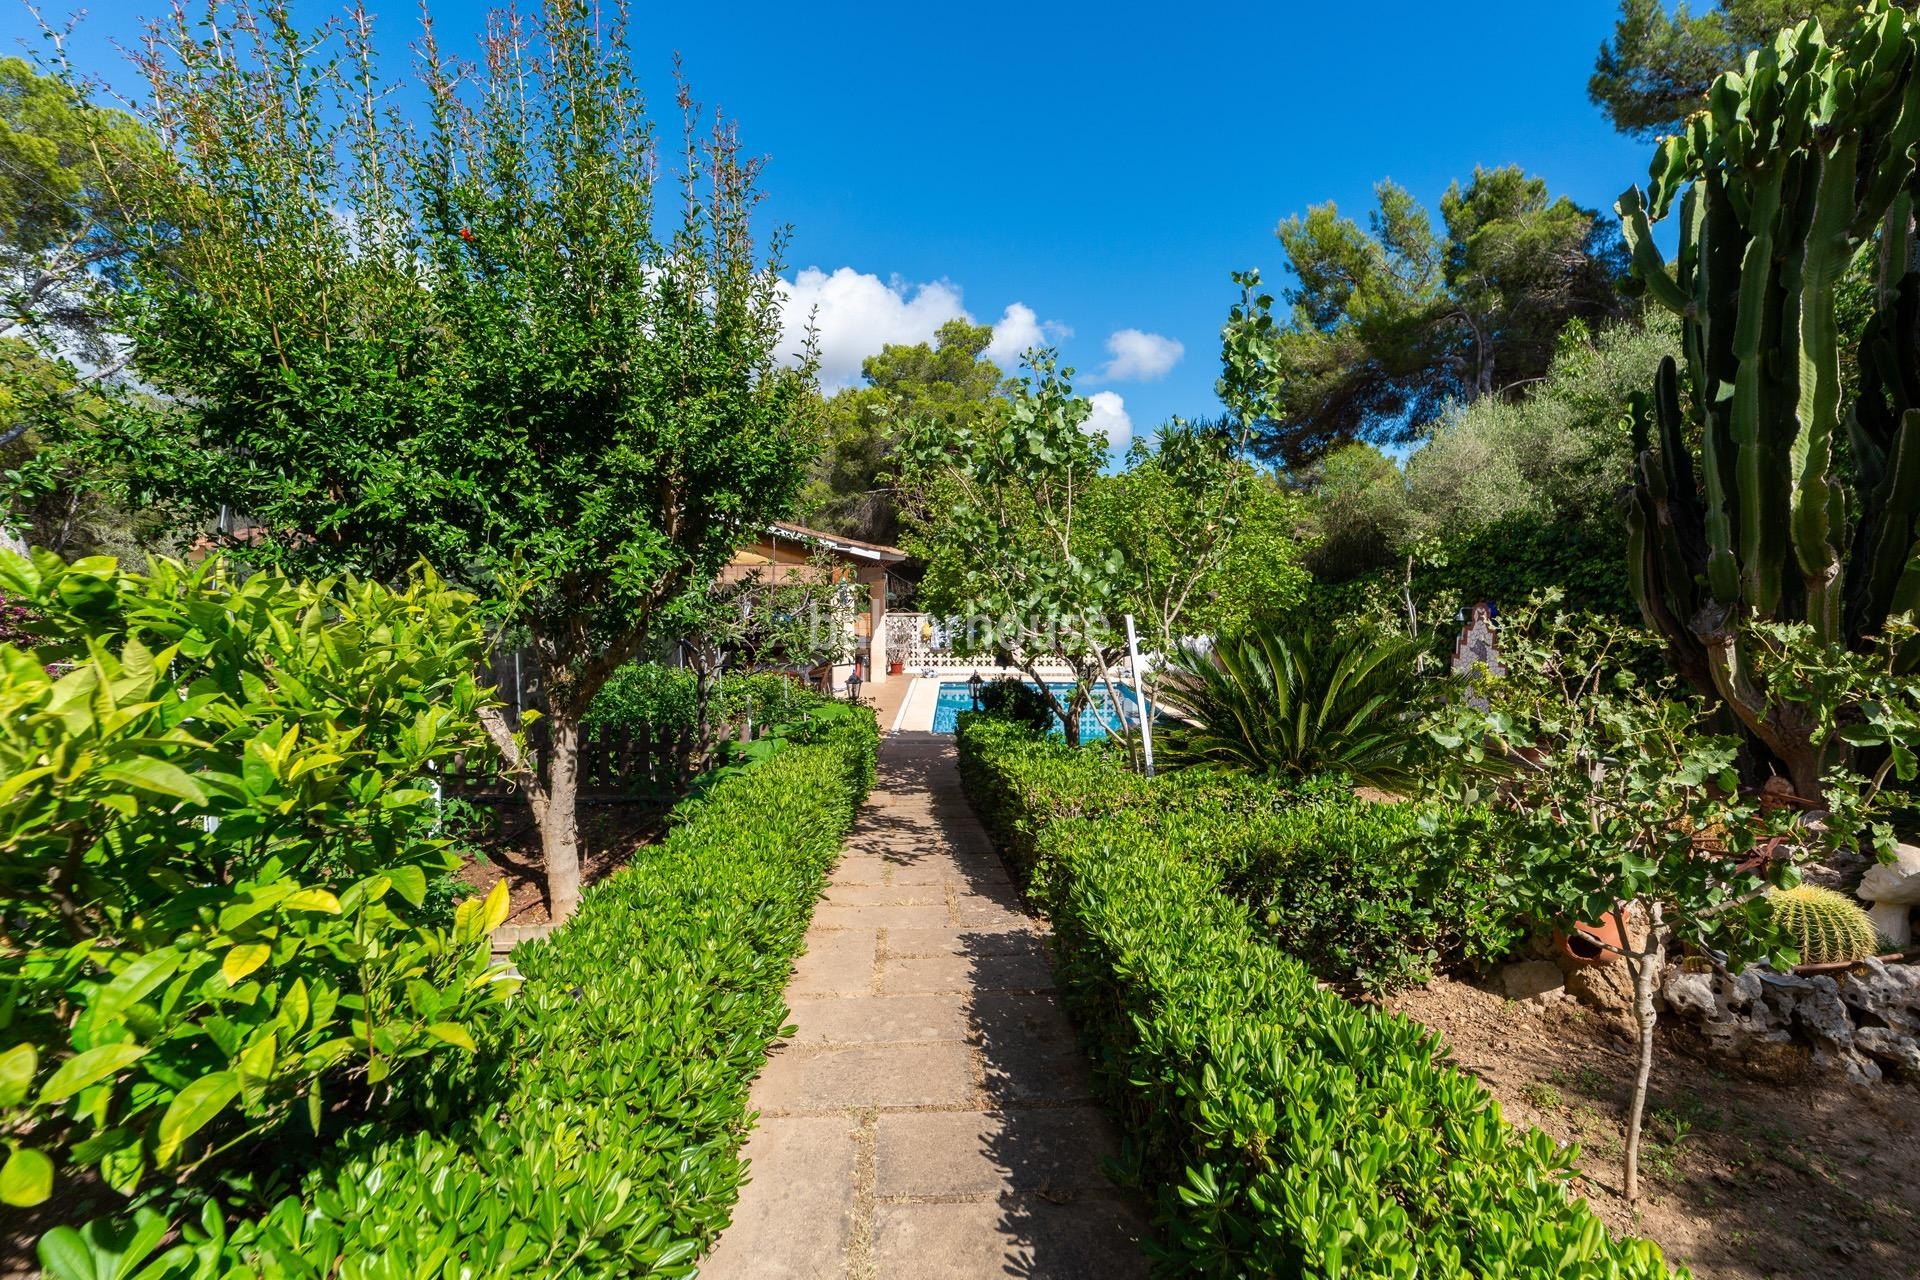 Nice villa with large garden area, pool and unobstructed mountain views in Santa Ponsa